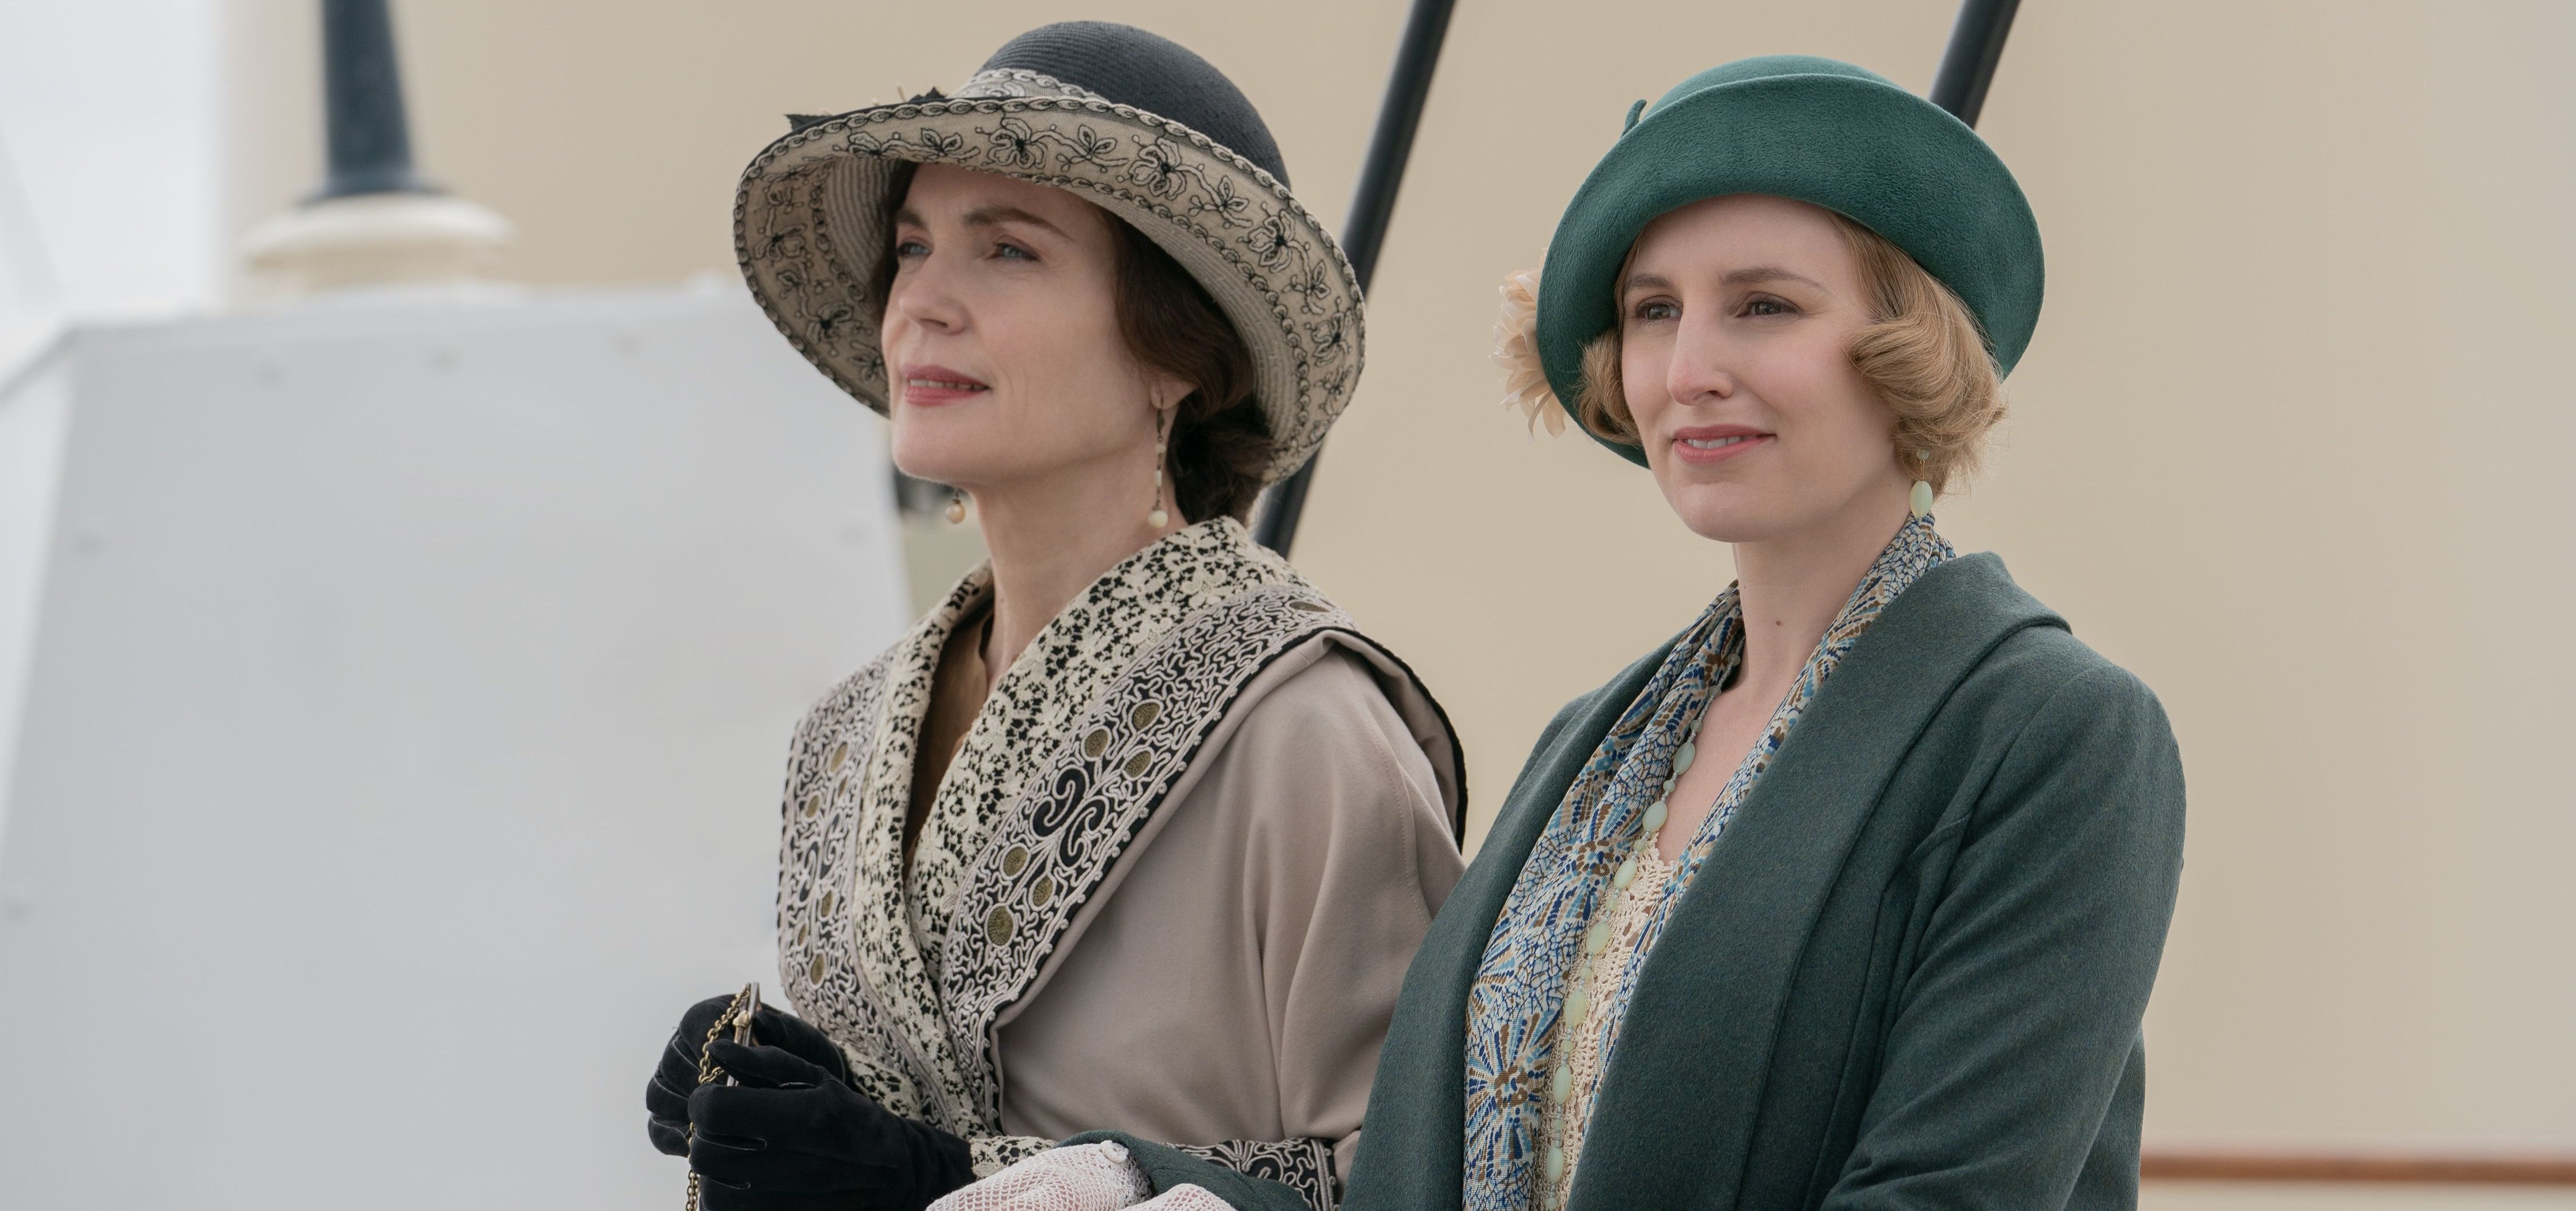 Downton Abbey 3 Confirmed, Starts Filming in Hampshire in Summer